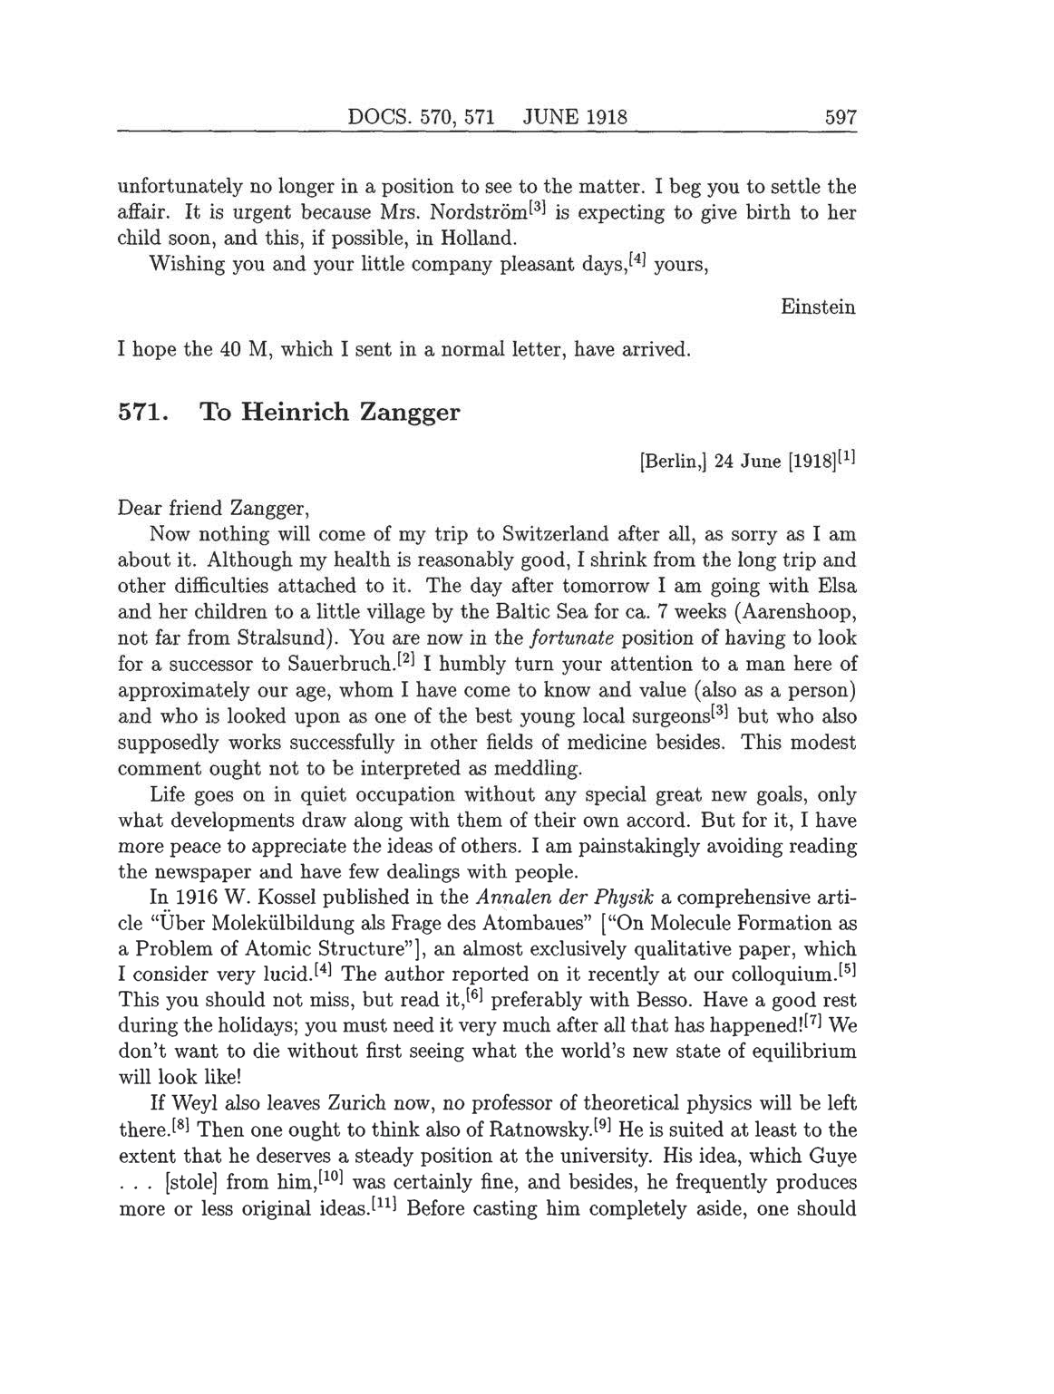 Volume 8: The Berlin Years: Correspondence, 1914-1918 (English translation supplement) page 597